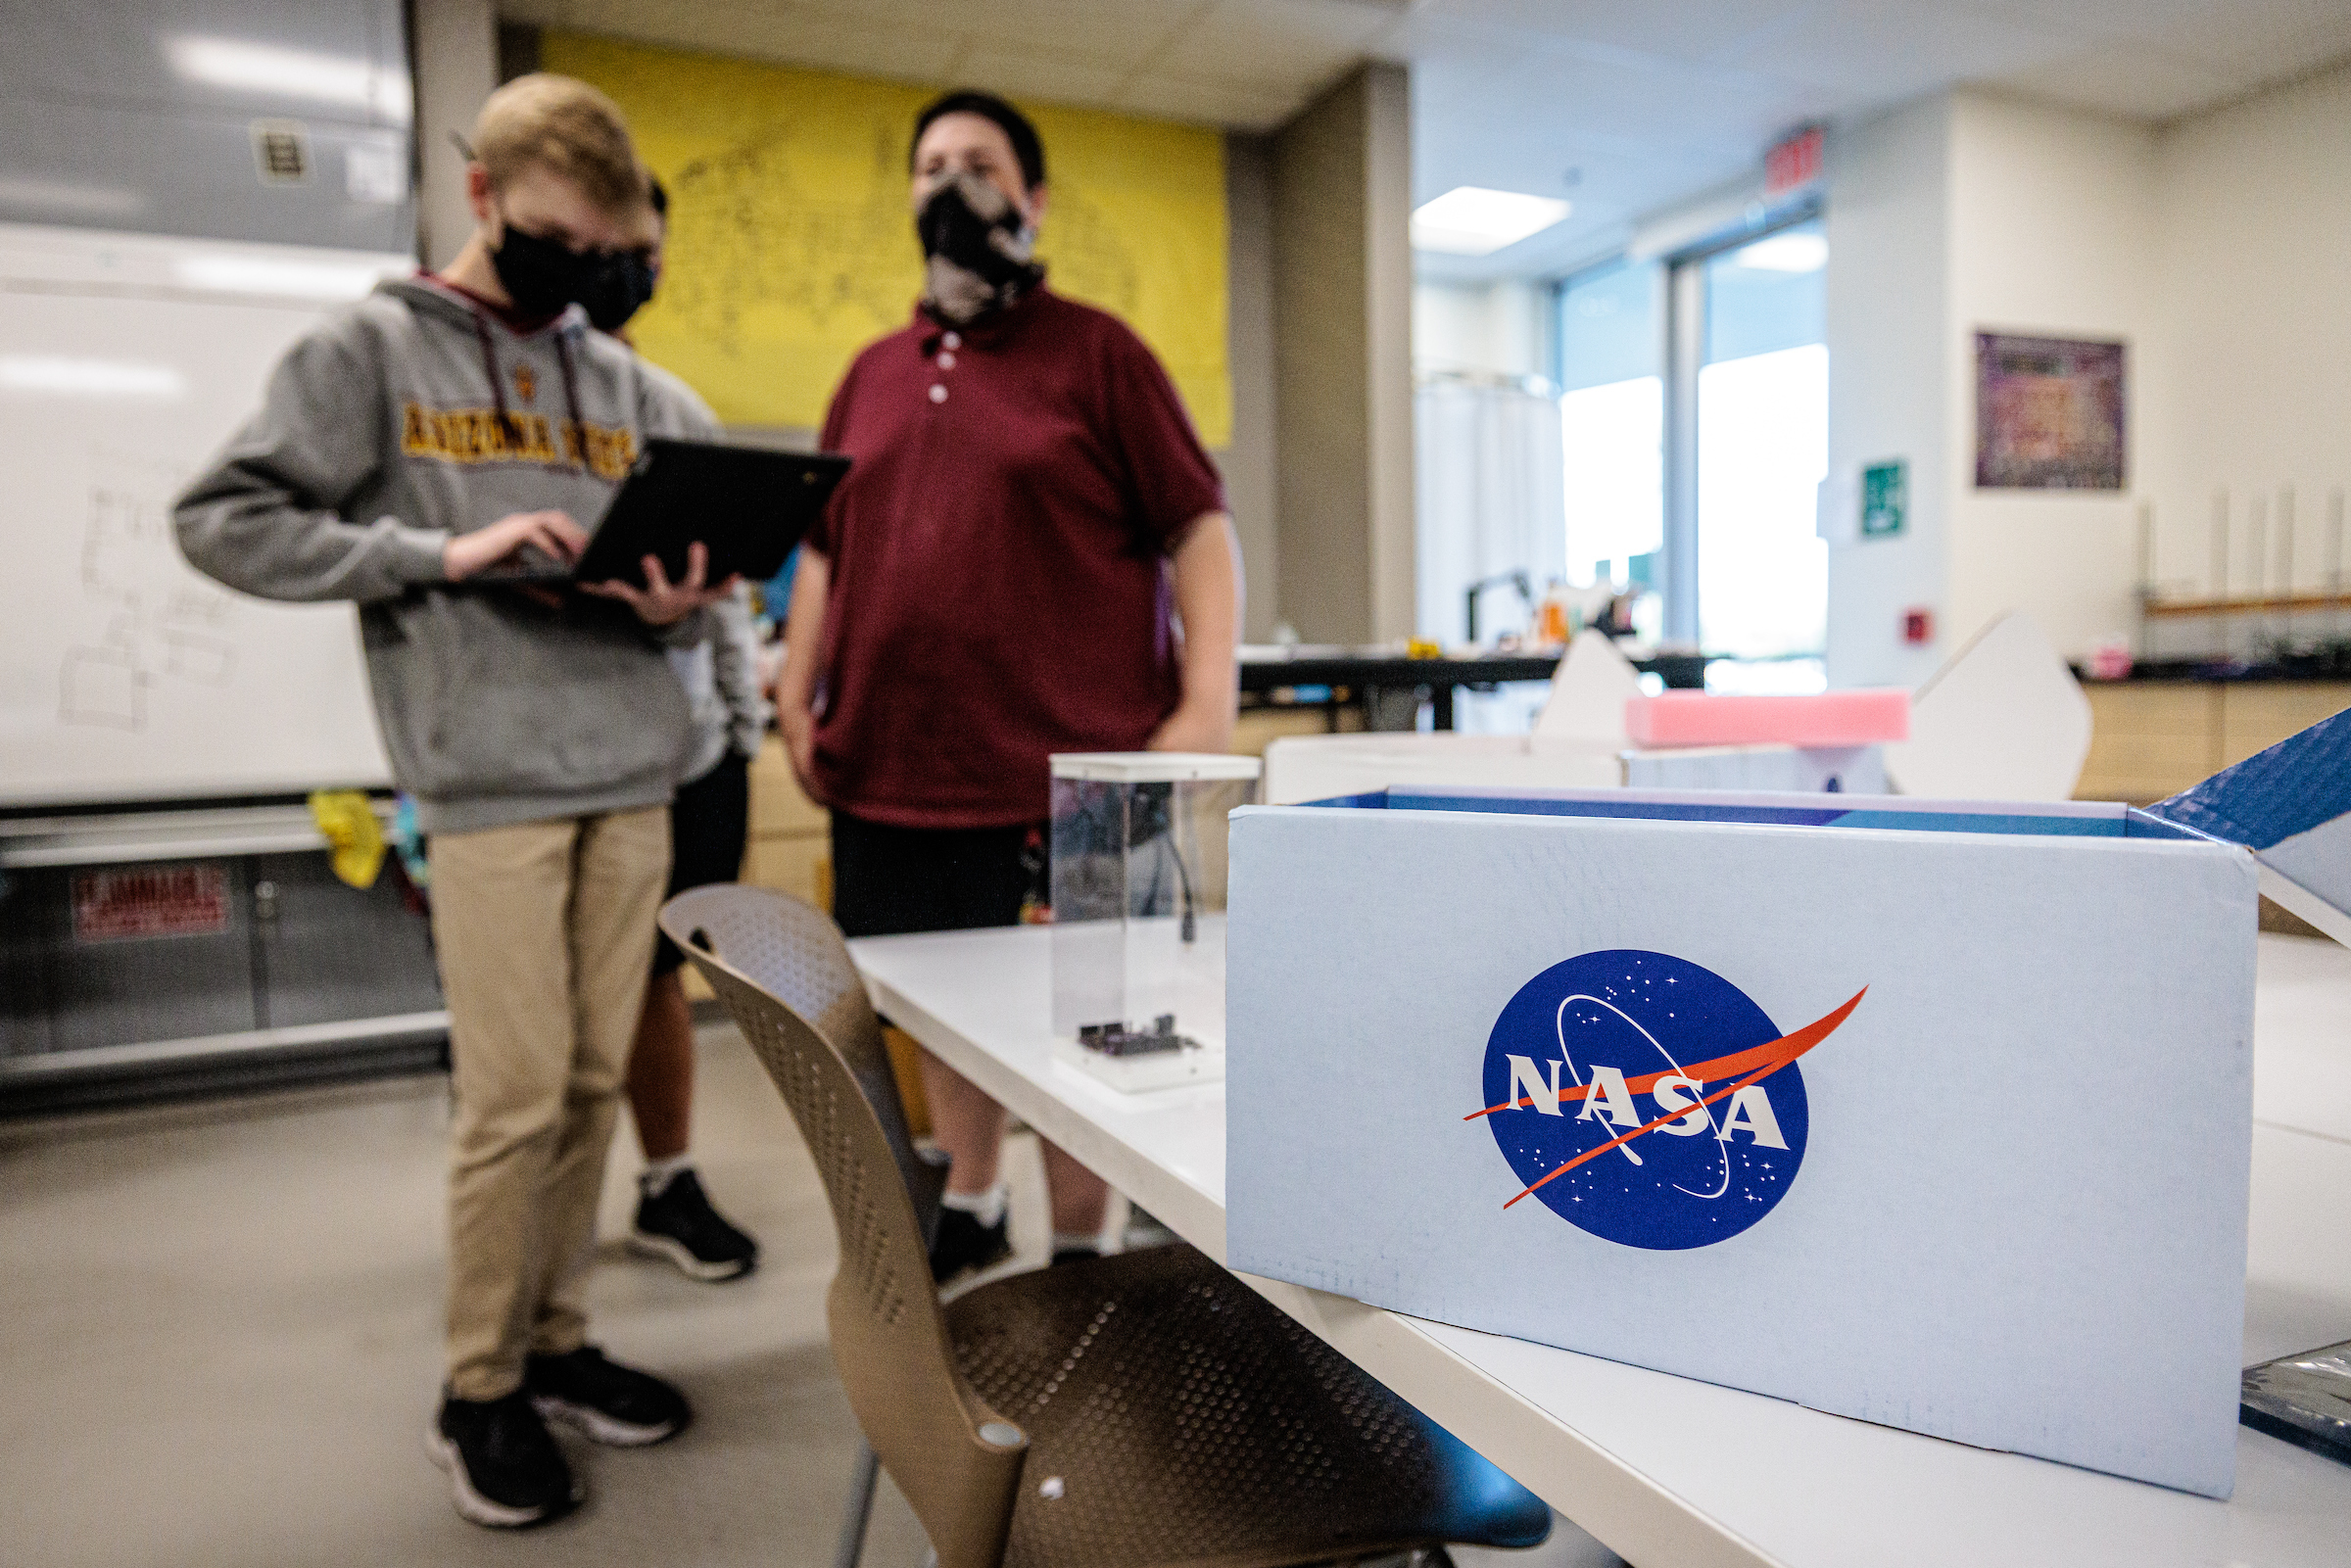 Box with NASA logo on it with students standing in background in classrom